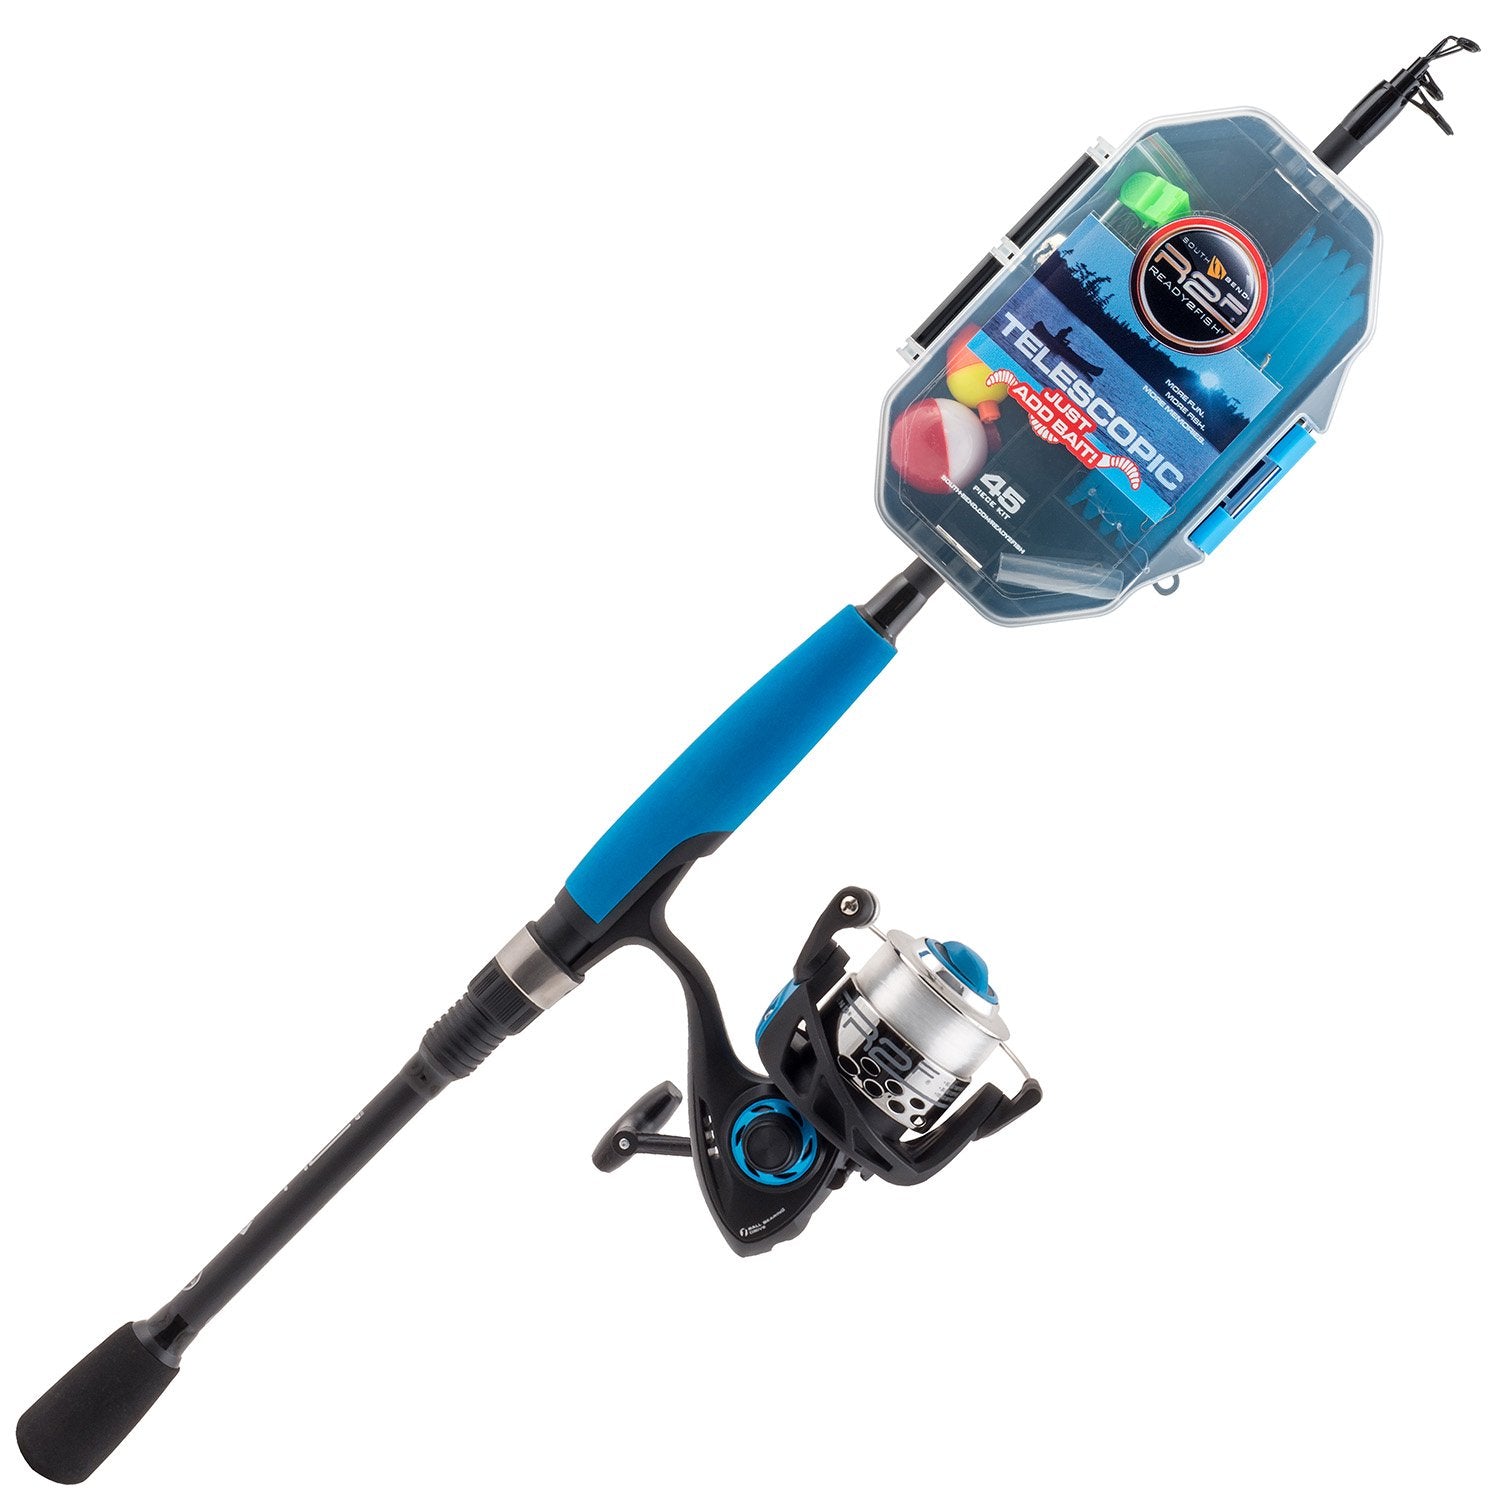 Dr.Fish Surf Fishing Rod and Reel Combo, Saltwater Fishing Pole Combo Set,  12ft Surf Casting Fishing Rod 9000 Spinning Reel 9+1 BB, Offshore Sea  Fishing Gear Kit Fishing Pole Equipment Set, Spinning